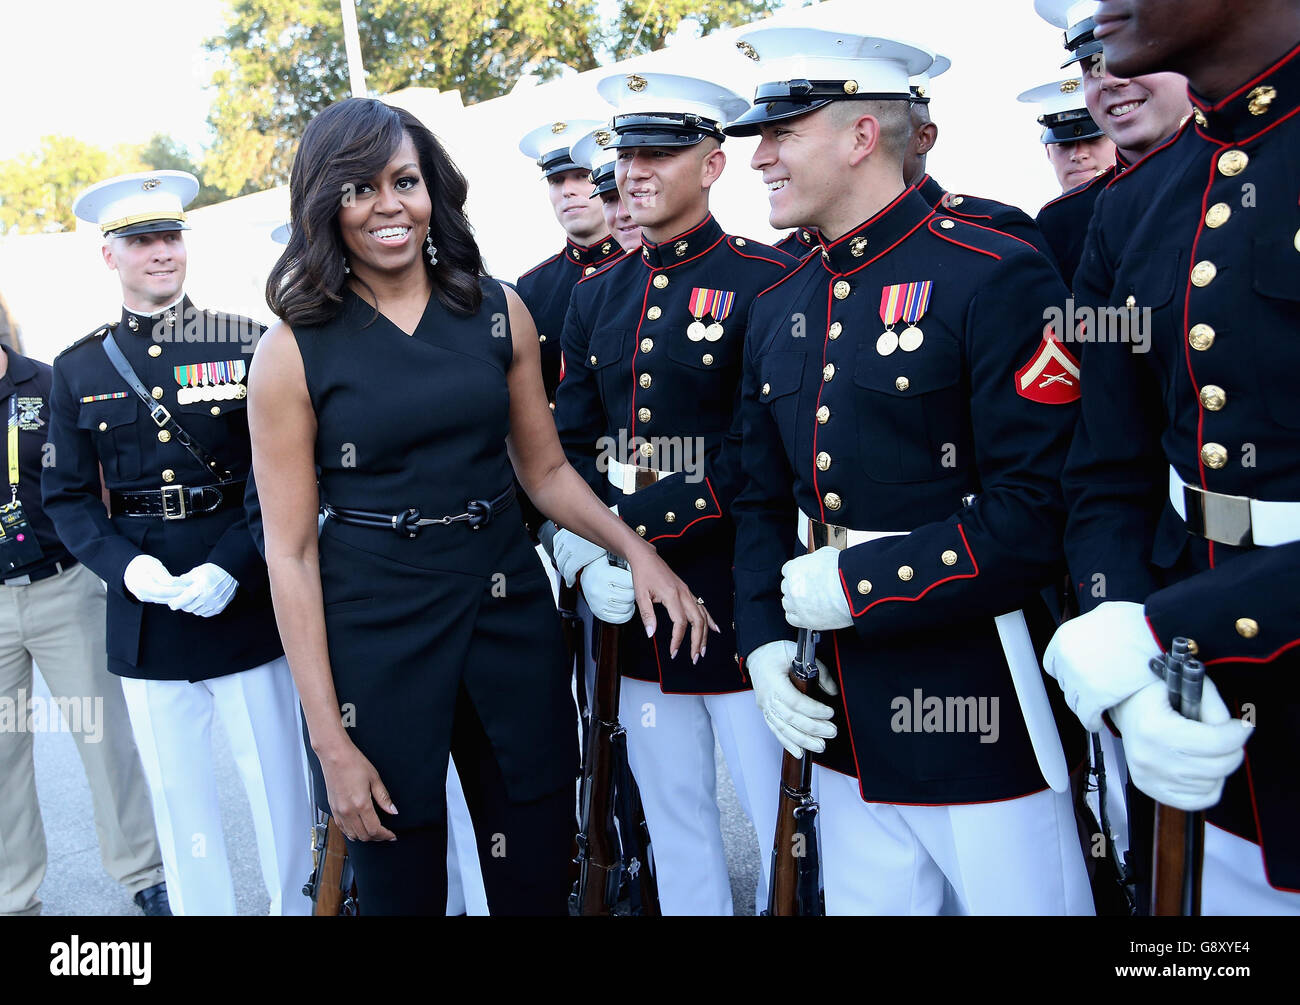 First Lady Michelle Obama meets the US Marine Corps Silent Drill Platoon ahead of the Opening Ceremony of the Invictus Games Orlando 2016 at ESPN Wide World of Sports in Orlando, Florida. Stock Photo